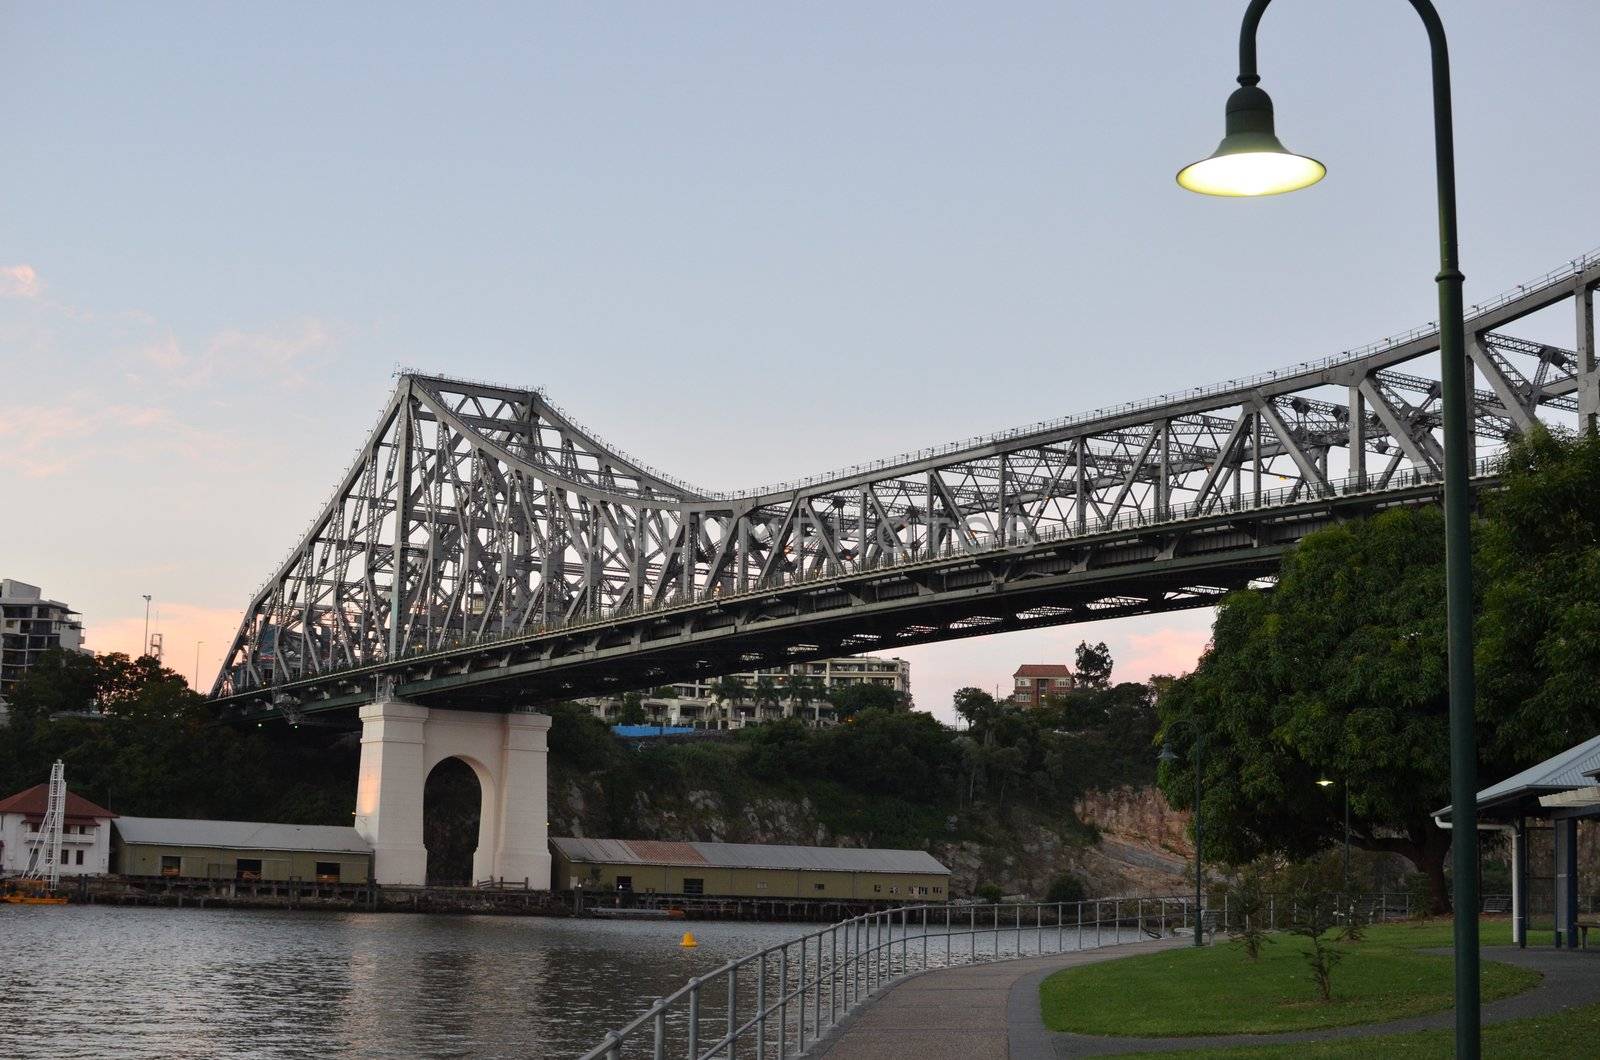 The Brisbane Story Bridge. Photo taken from the south bank in the early evening. The street light in the foreground had just illuminated.